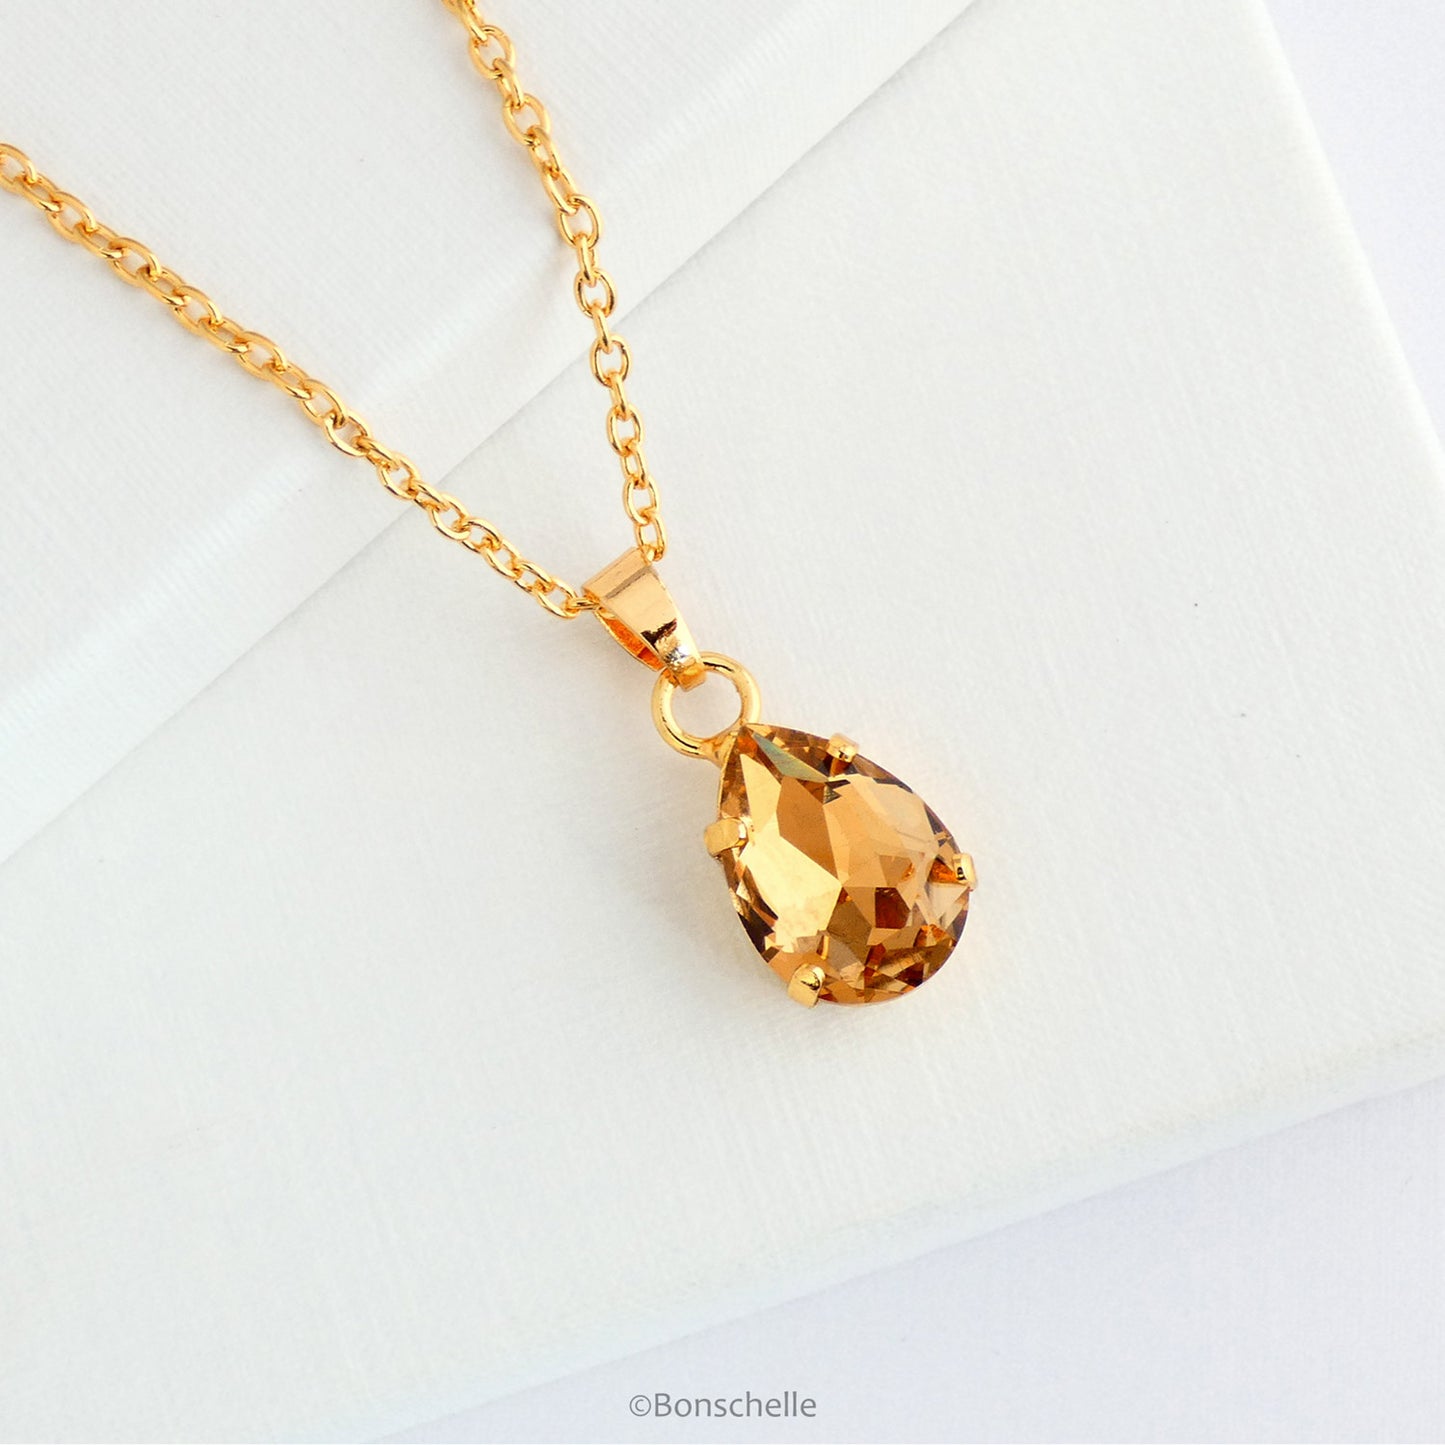 Bronze or Topaz coloured crystal pear necklace with gold plated chain